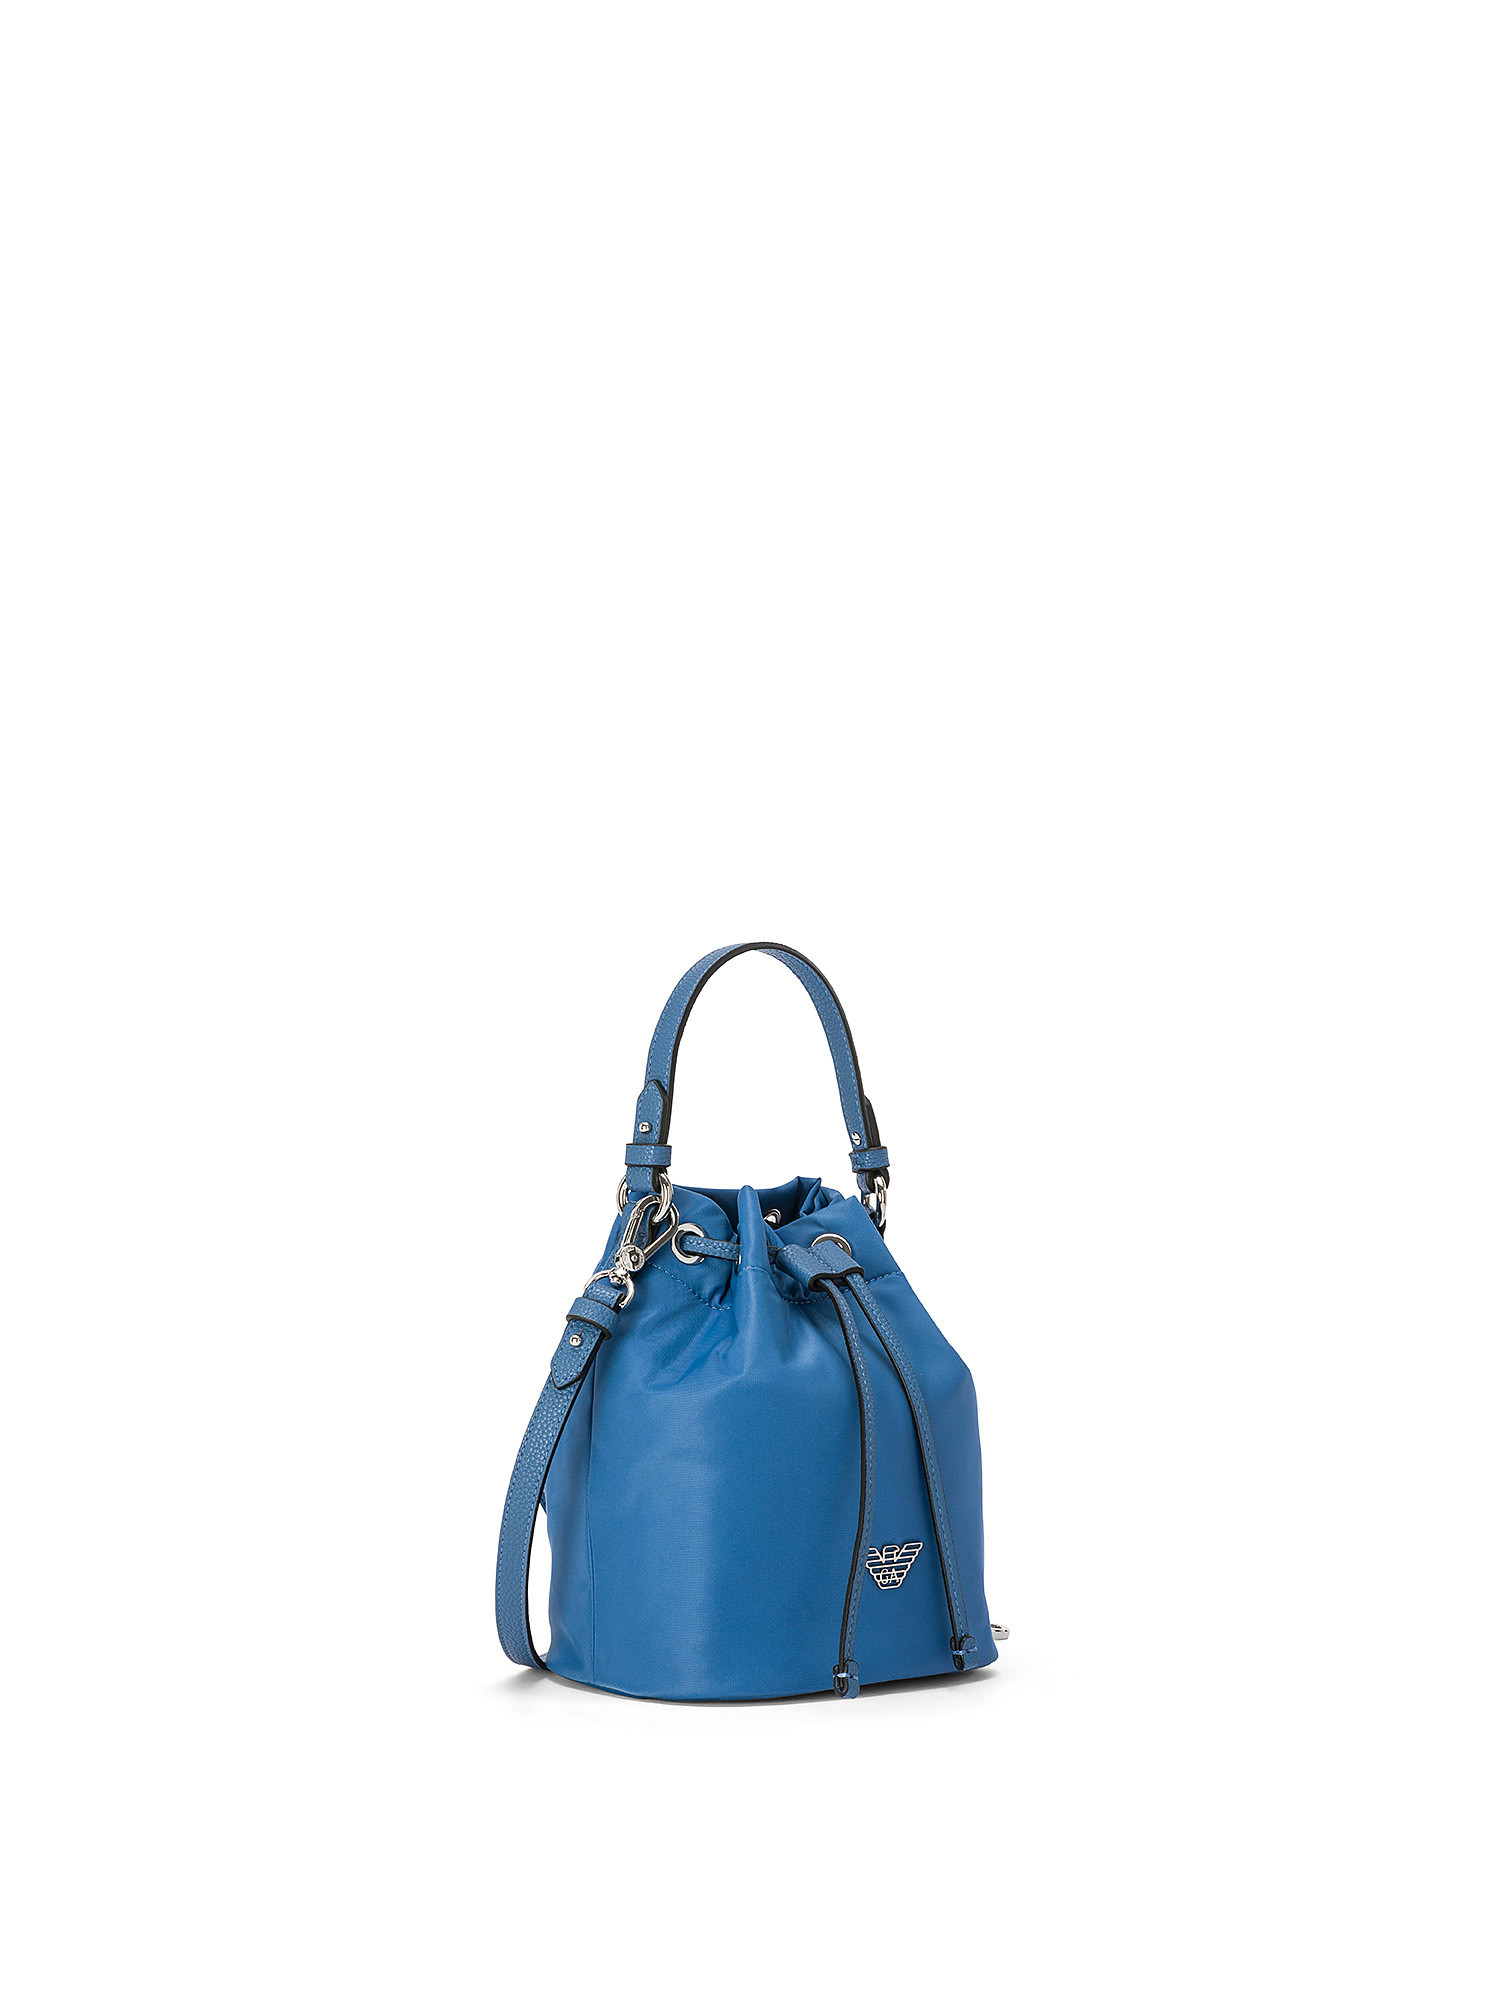 Emporio Armani - Bucket bag in recycled nylon, Light Blue, large image number 1